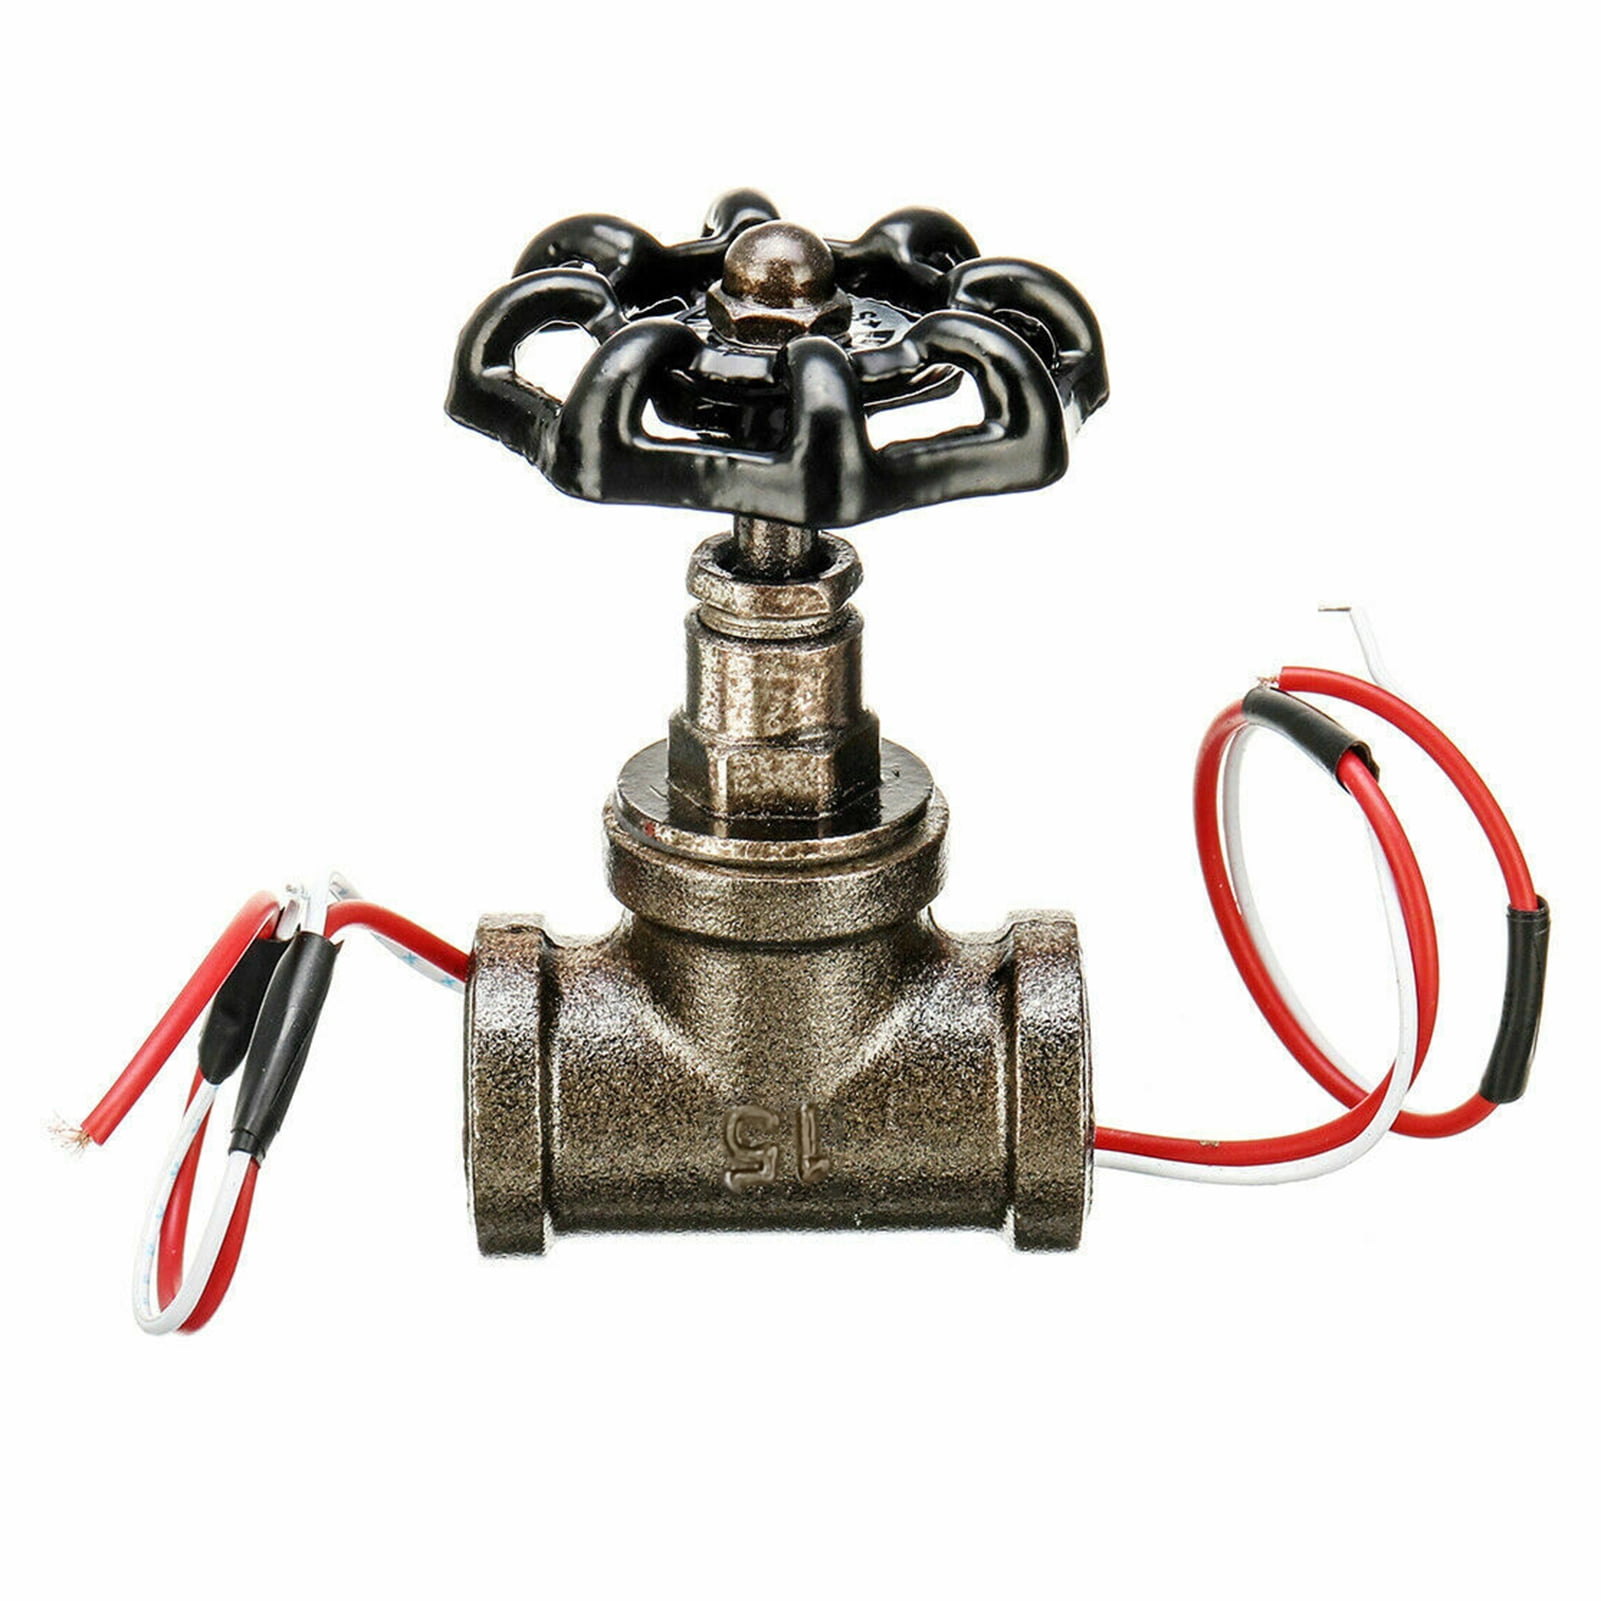 VINTAGE STEAMPUNK STRETCH HOSE BIBB VALVE SWITCH NOW YOU CAN STEAMPUNK YOUR WALL 